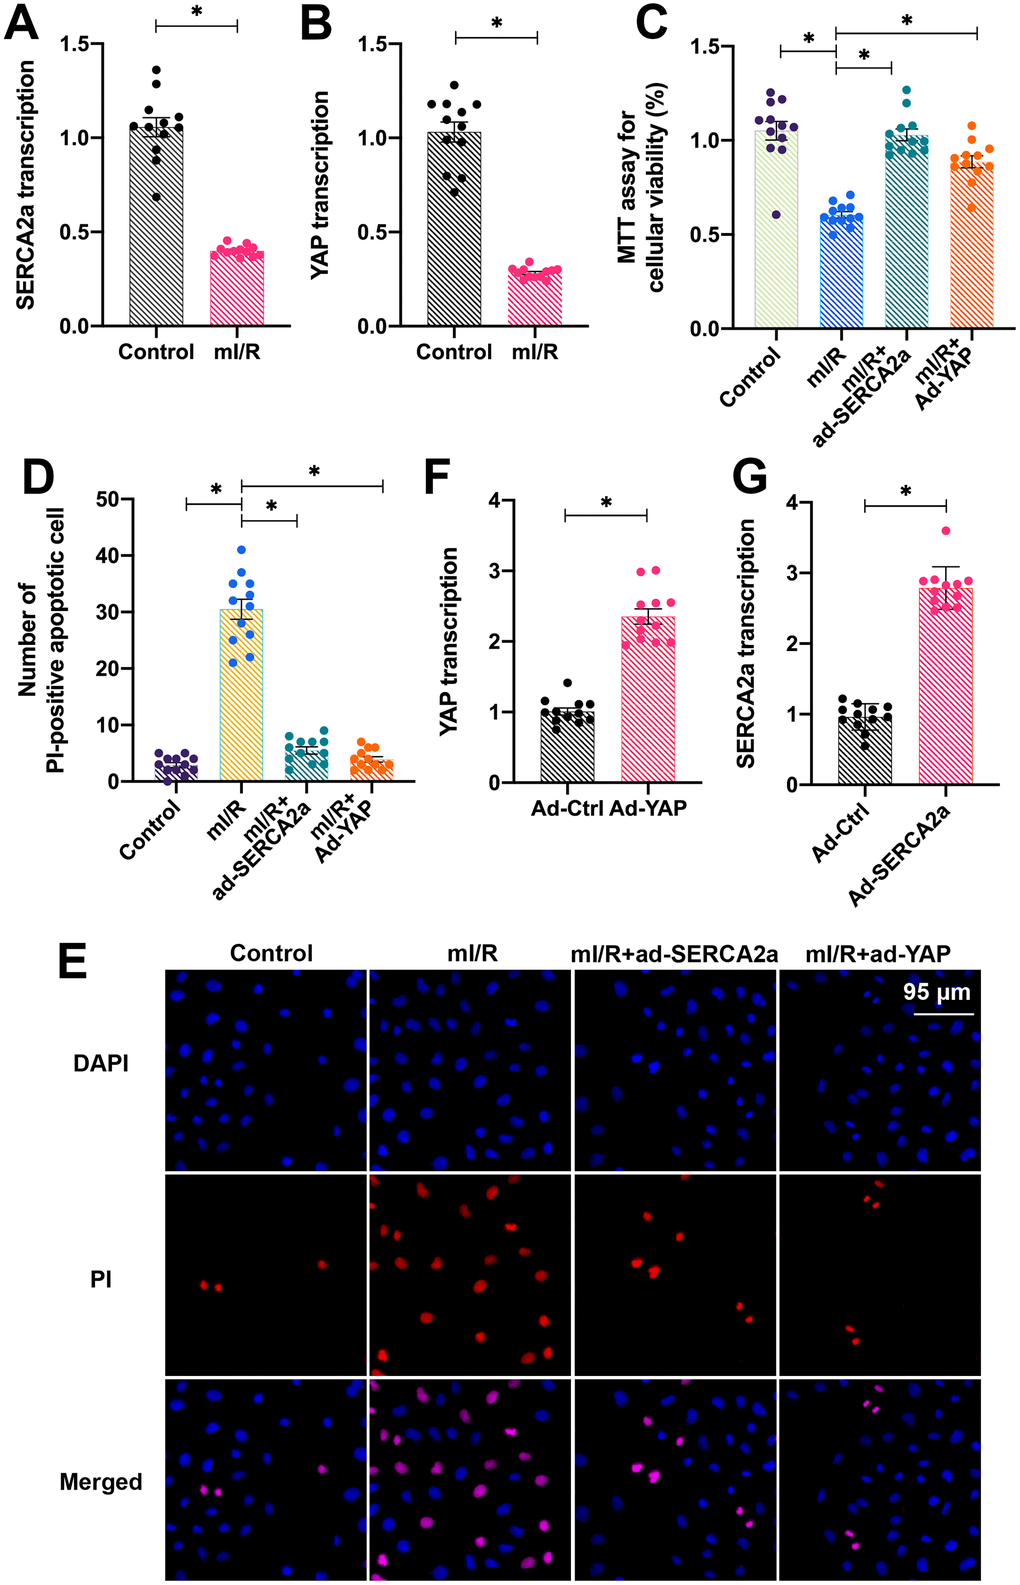 Overexpression of YAP or SERCA2a attenuates I/R-induced cardiomyocyte apoptosis. (A, B) Quantitative polymerase chain reaction (qPCR) assay was used to analyze the mRNA levels of YAP and SERCA2a in cardiomyocytes subjected to mI/R injury. SERCA2a adenovirus (ad-SERCA2a) and YAP adenovirus (ad-YAP) were transfected into cardiomyocytes to overexpress SERCA2a and YAP, respectively. (C) The MTT assay was used to detect the cardiomyocyte viability and (D, E) PI staining was used to assess the number (percentage) of apoptotic cells. (F, G) The qPCR assay was used to analyze the mRNA levels of YAP and SERCA2a in cardiomyocytes transfected with ad-SERCA2a or ad-YAP under physiological conditions. *P